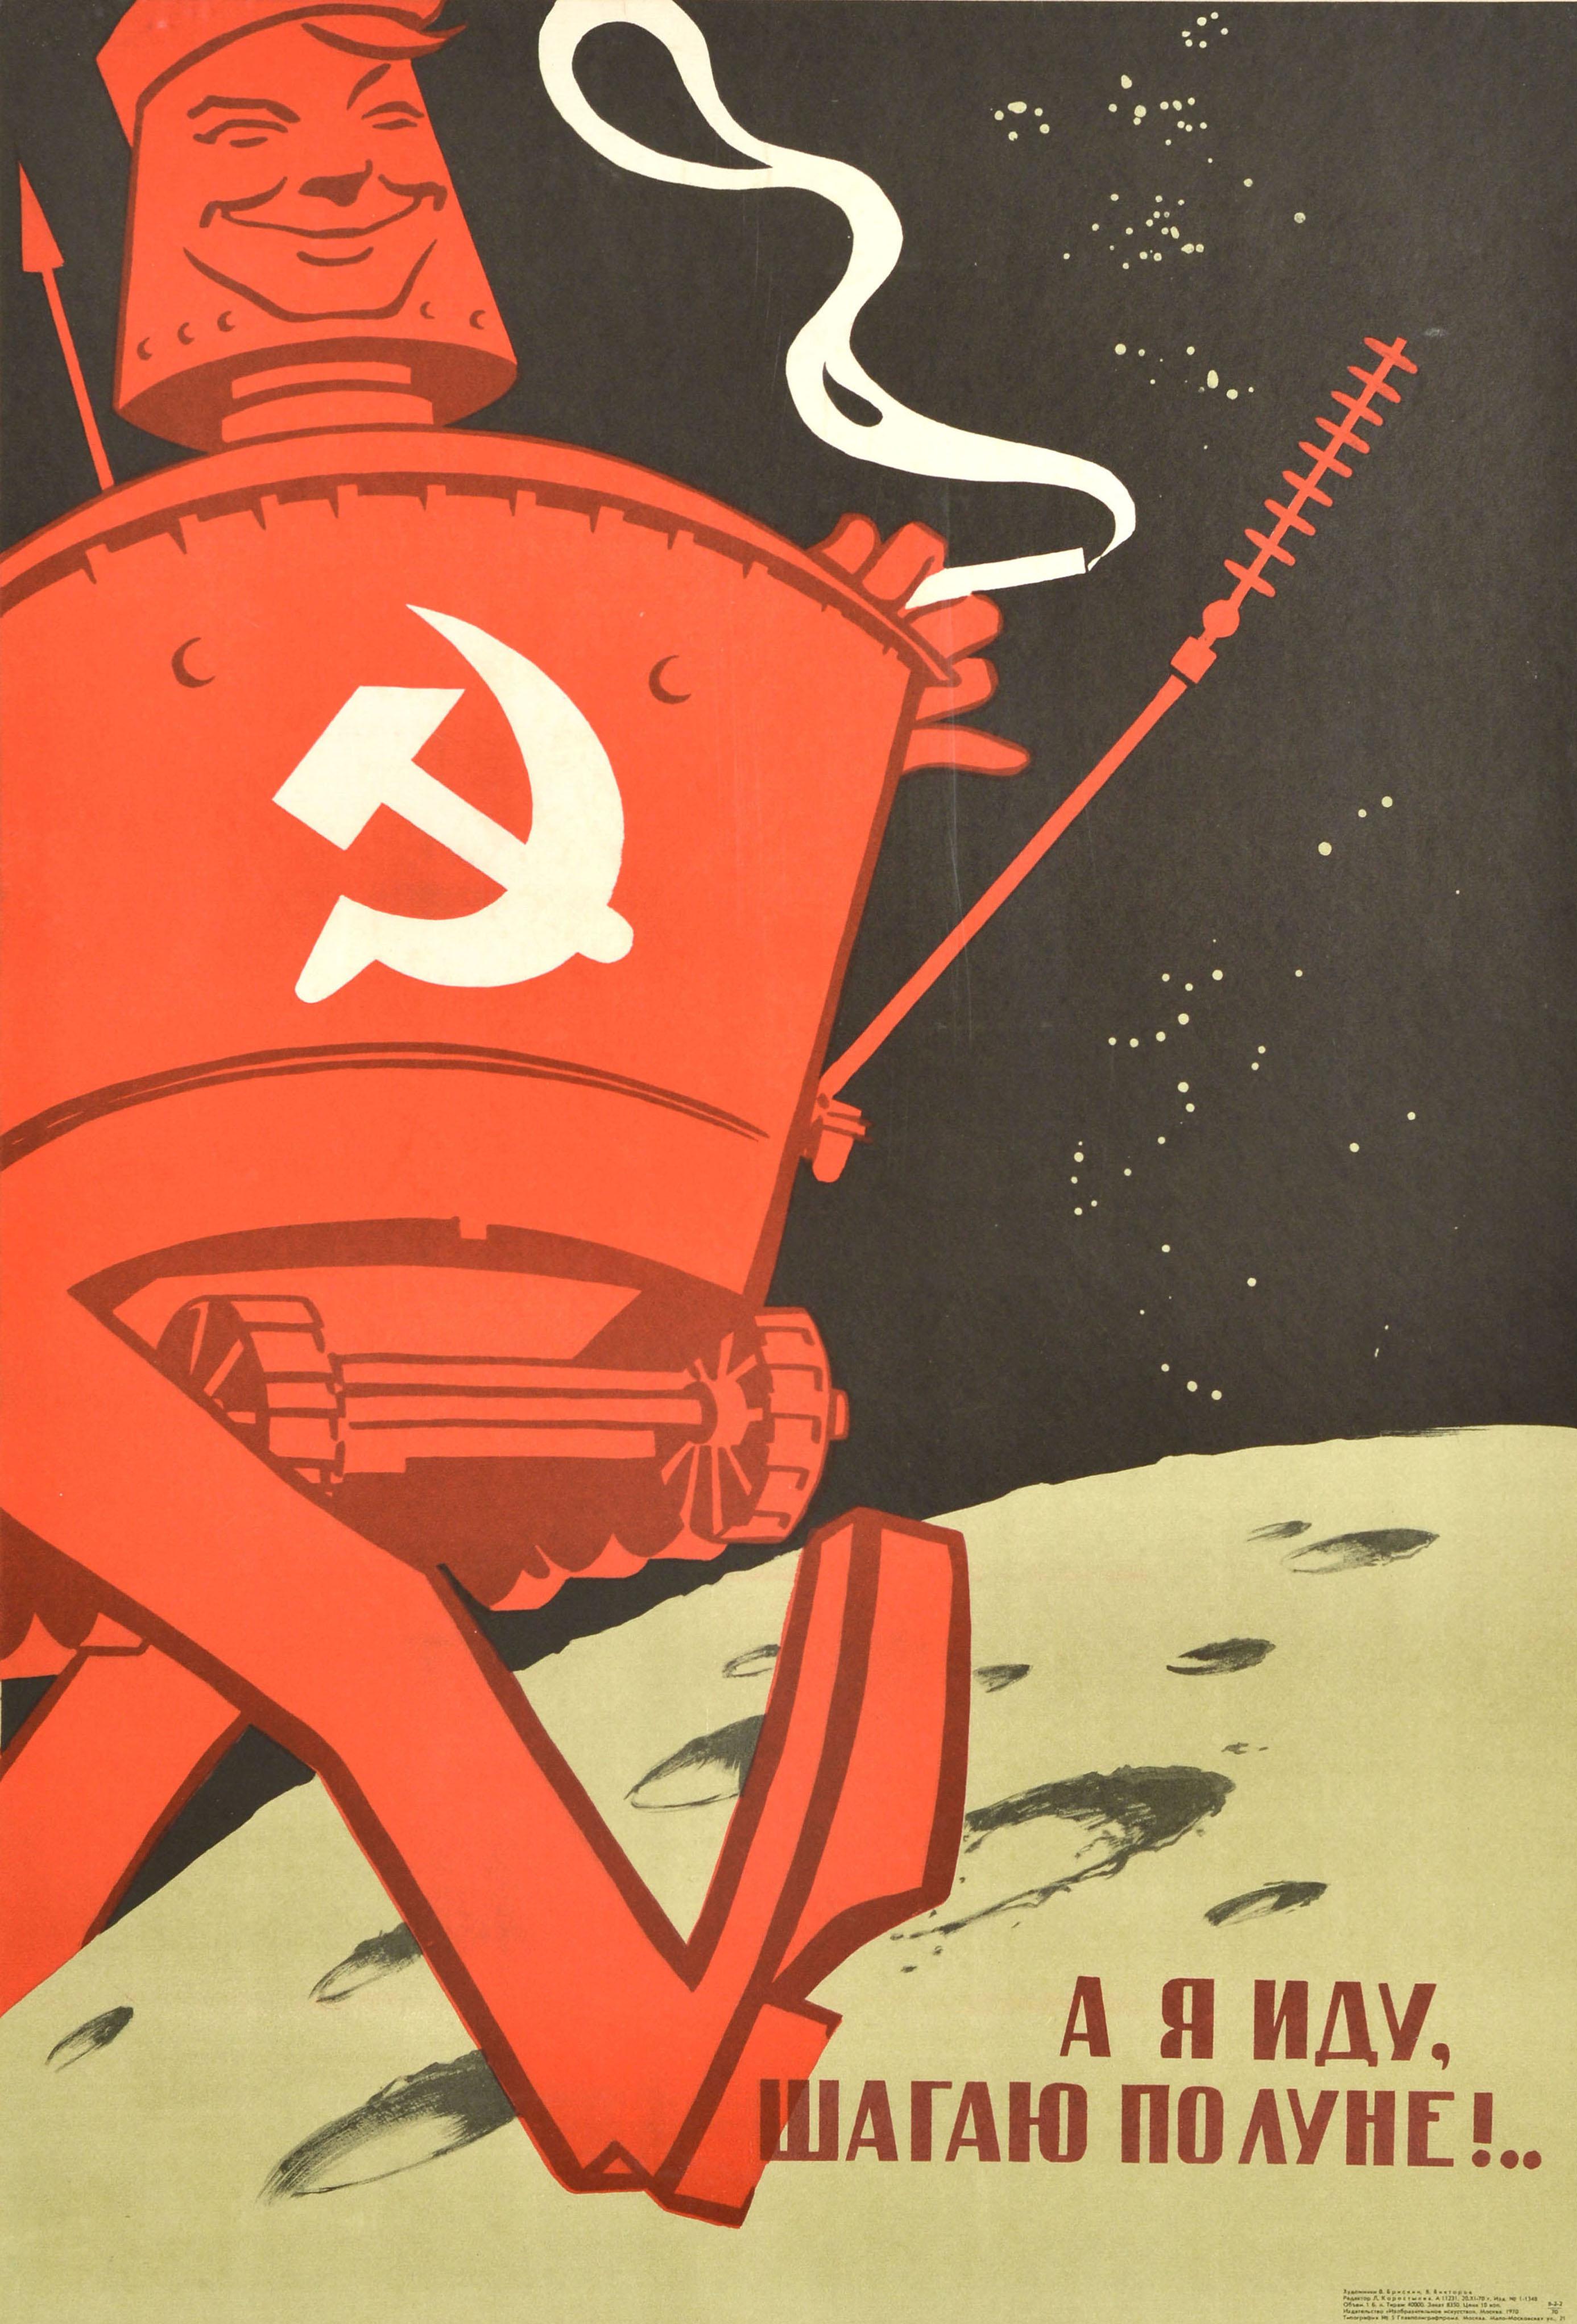 Original vintage Soviet propaganda poster - I am walking on the moon! - featuring a fun illustration of a smiling Lunokhod lunar rover walking on the moon and smoking a cigarette with the phrase mimicking a popular USSR film title and song Walking